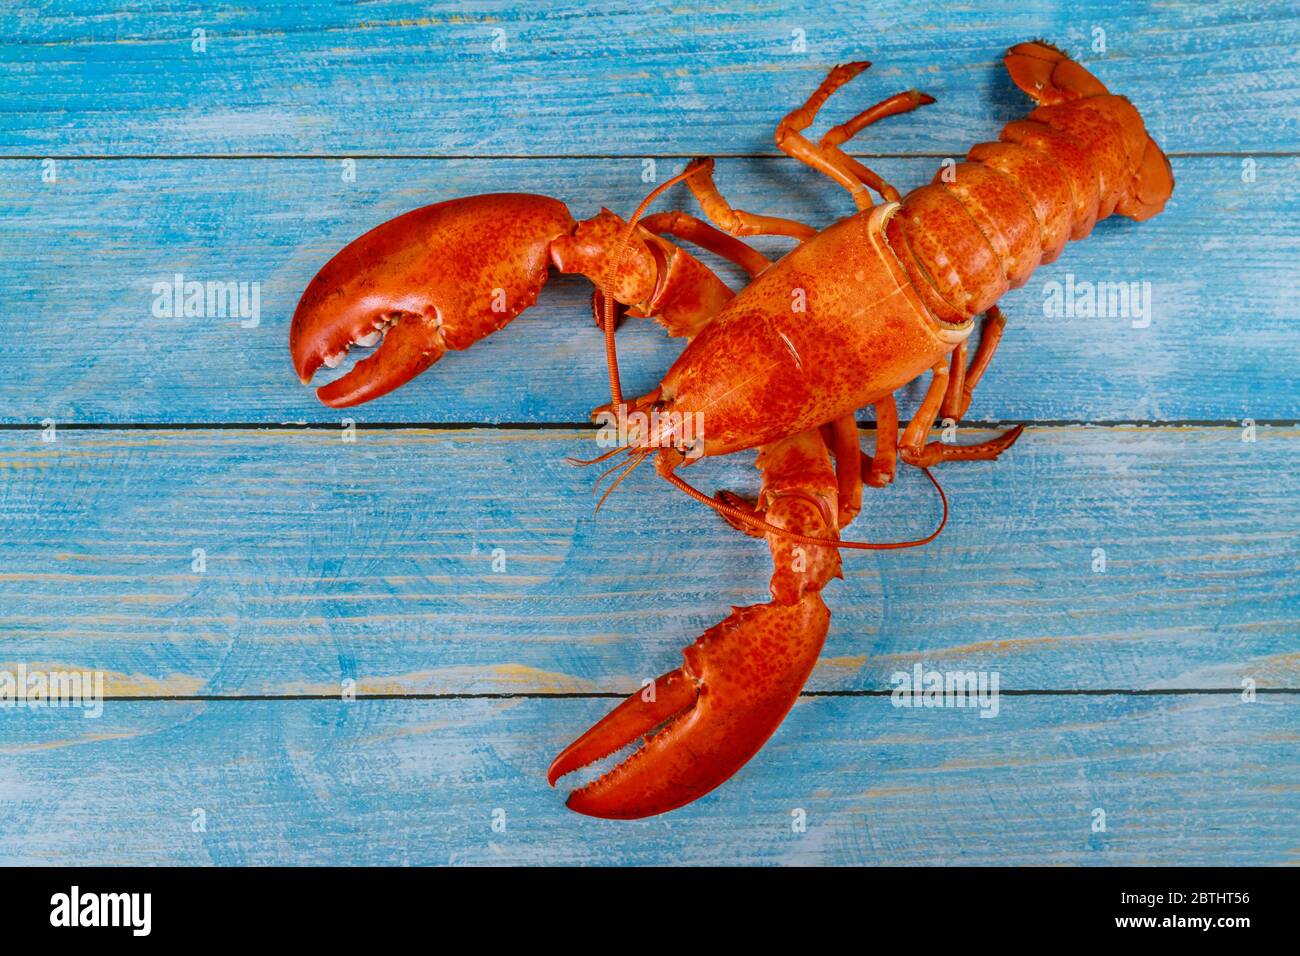 Delicious red lobster seafood on old blue wooden table. Stock Photo